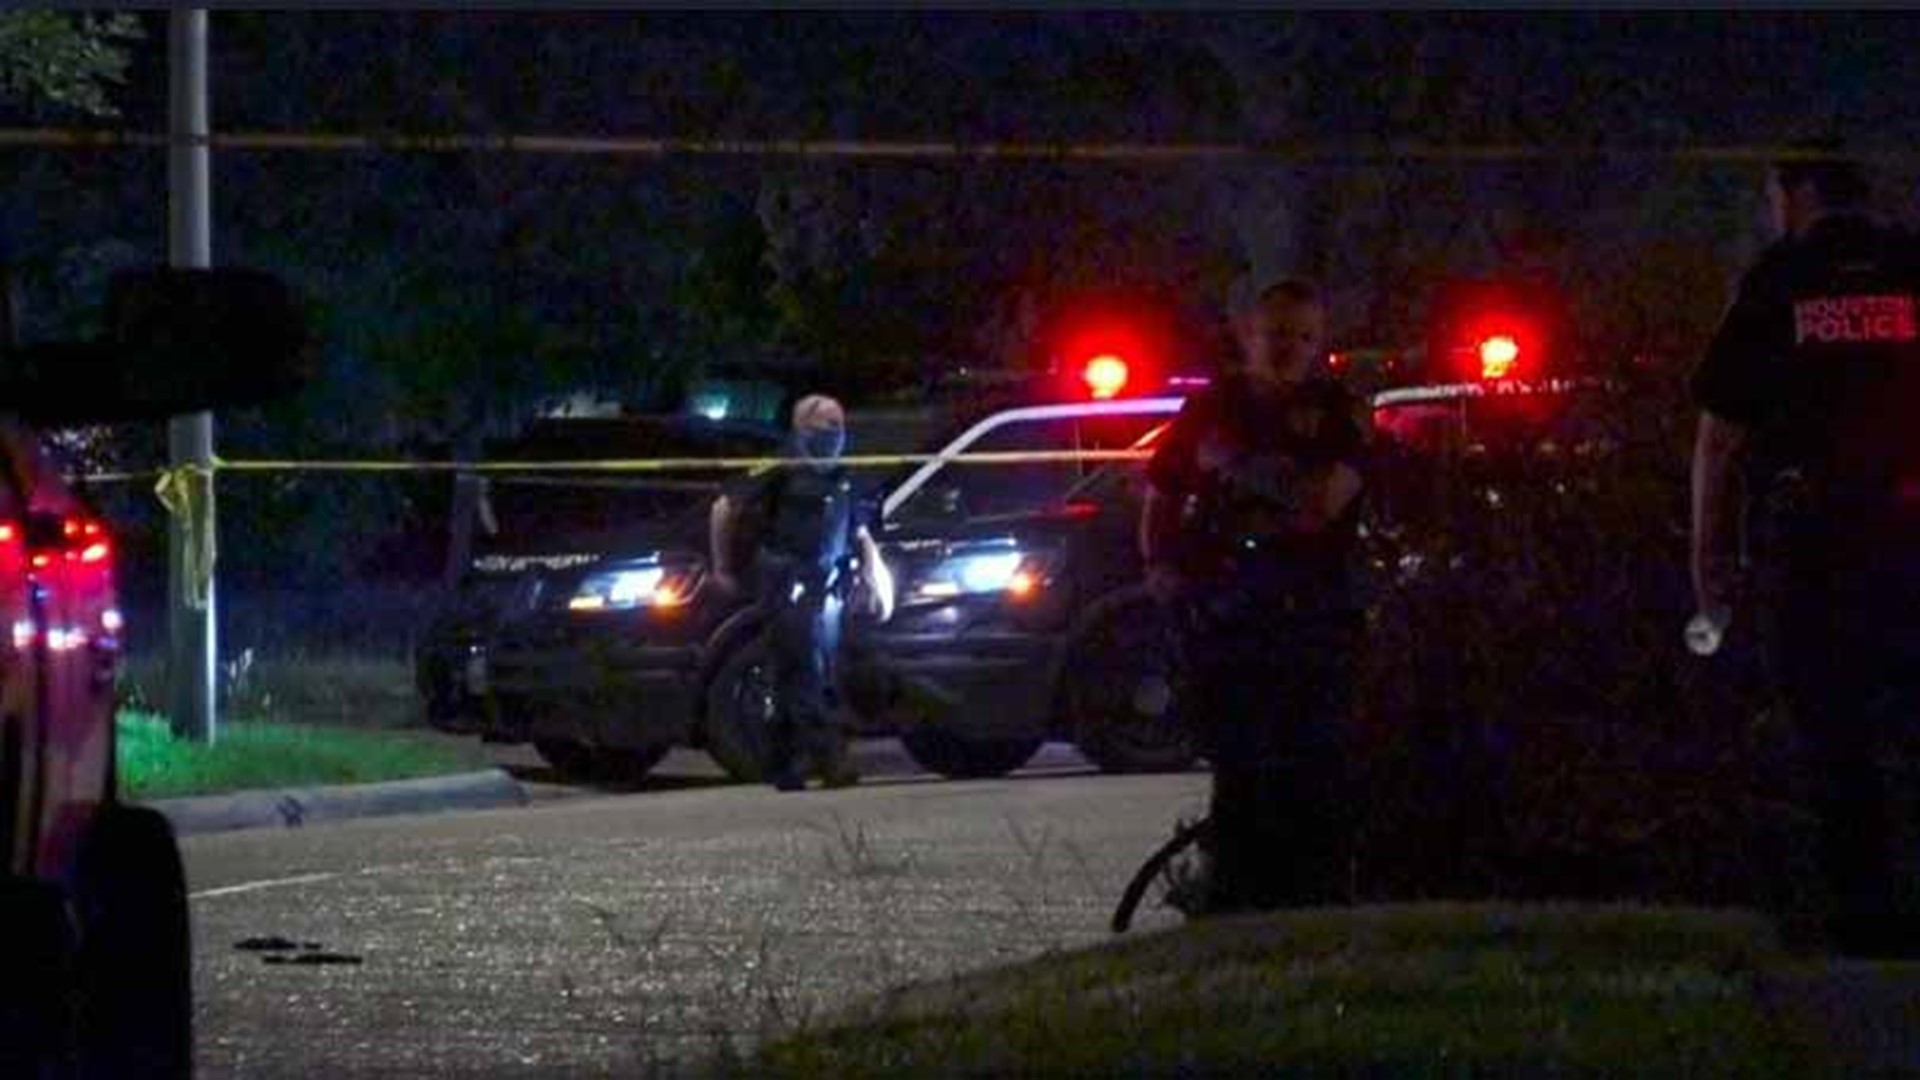 Houston police are questioning a suspect about a deadly shooting Thursday night in a north Houston neighborhood.